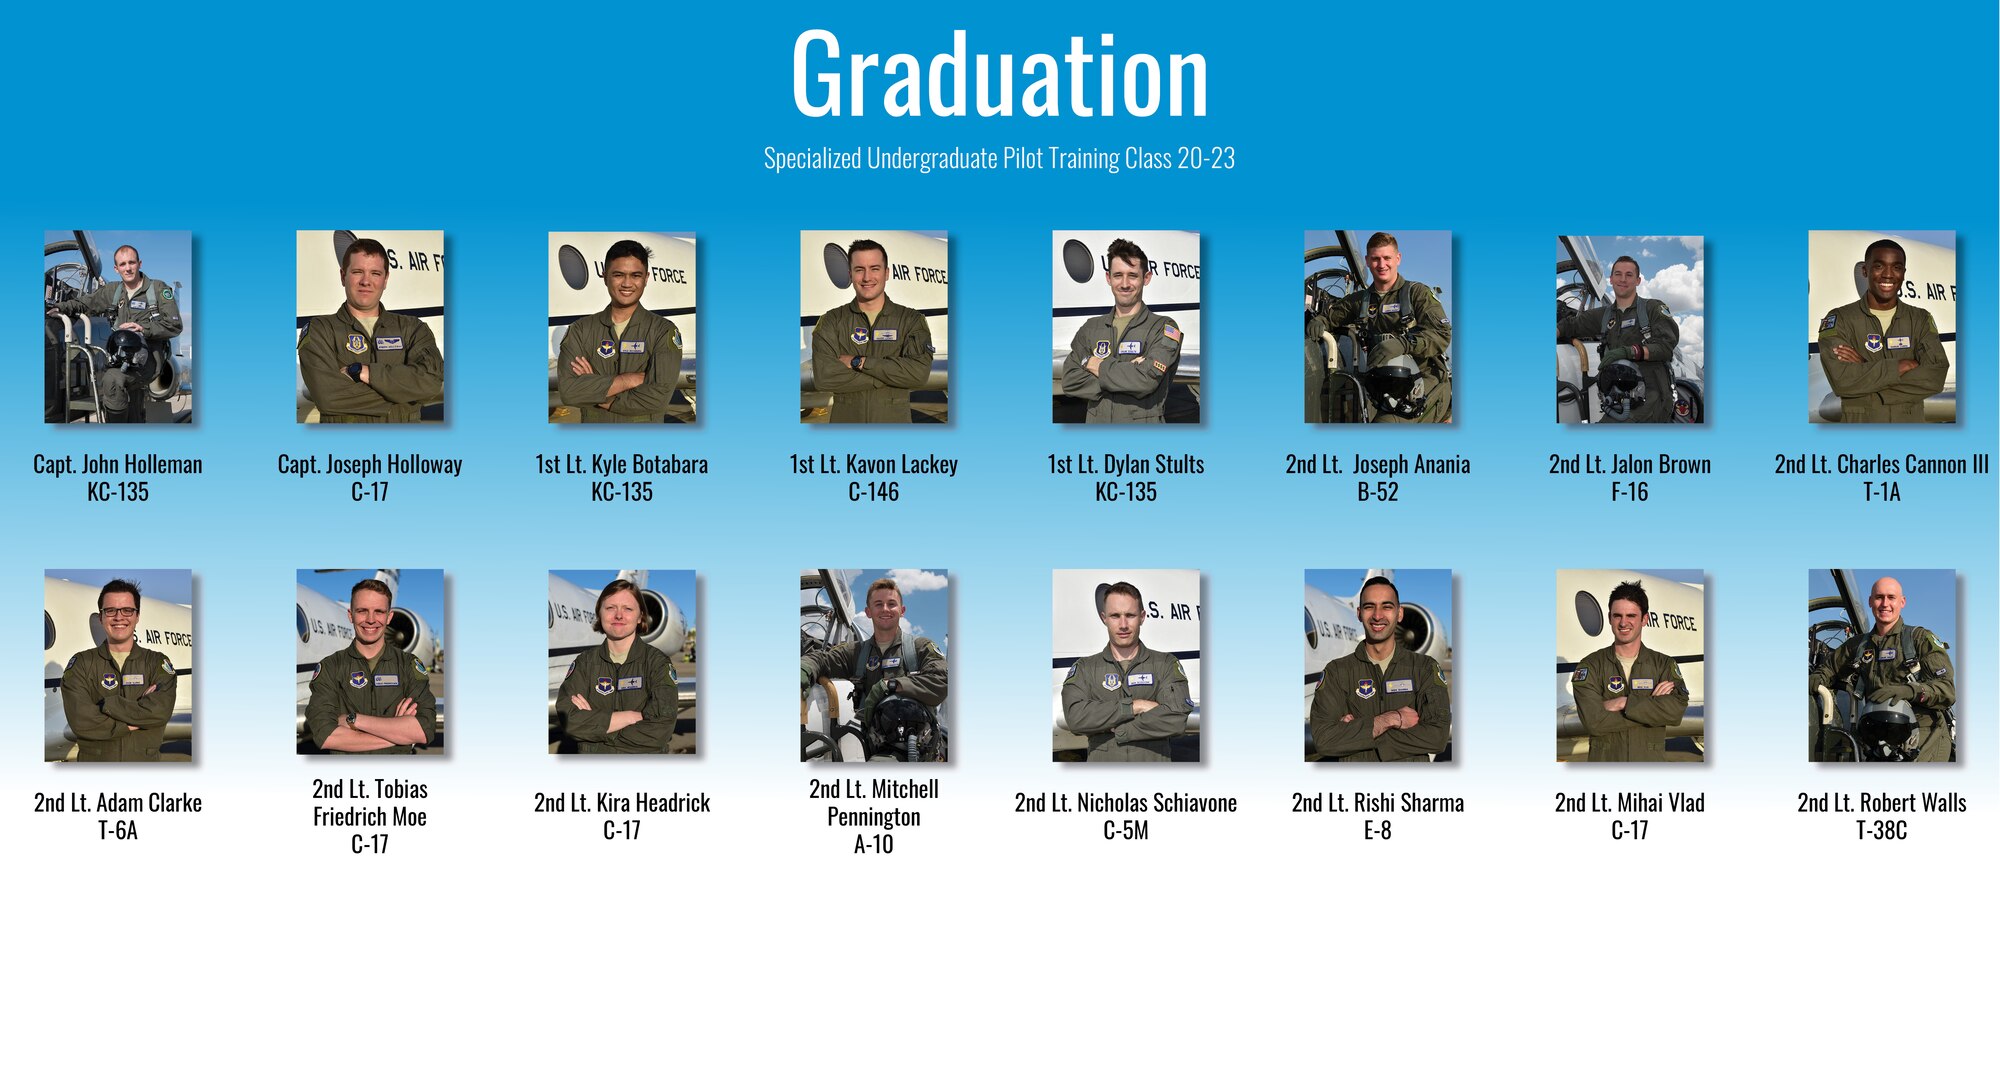 Specialized Undergraduate Pilot Training Class 20-22 and 20-23 are set to graduate after 52 weeks of training at Laughlin Air Force Base, Texas, Sept. 3, 2020. Laughlin is the home of the 47th Flying Training Wing, whose mission is to build combat-ready Airmen, leaders and pilots. (U.S. Air Force graphic by Senior Airman Anne McCready)